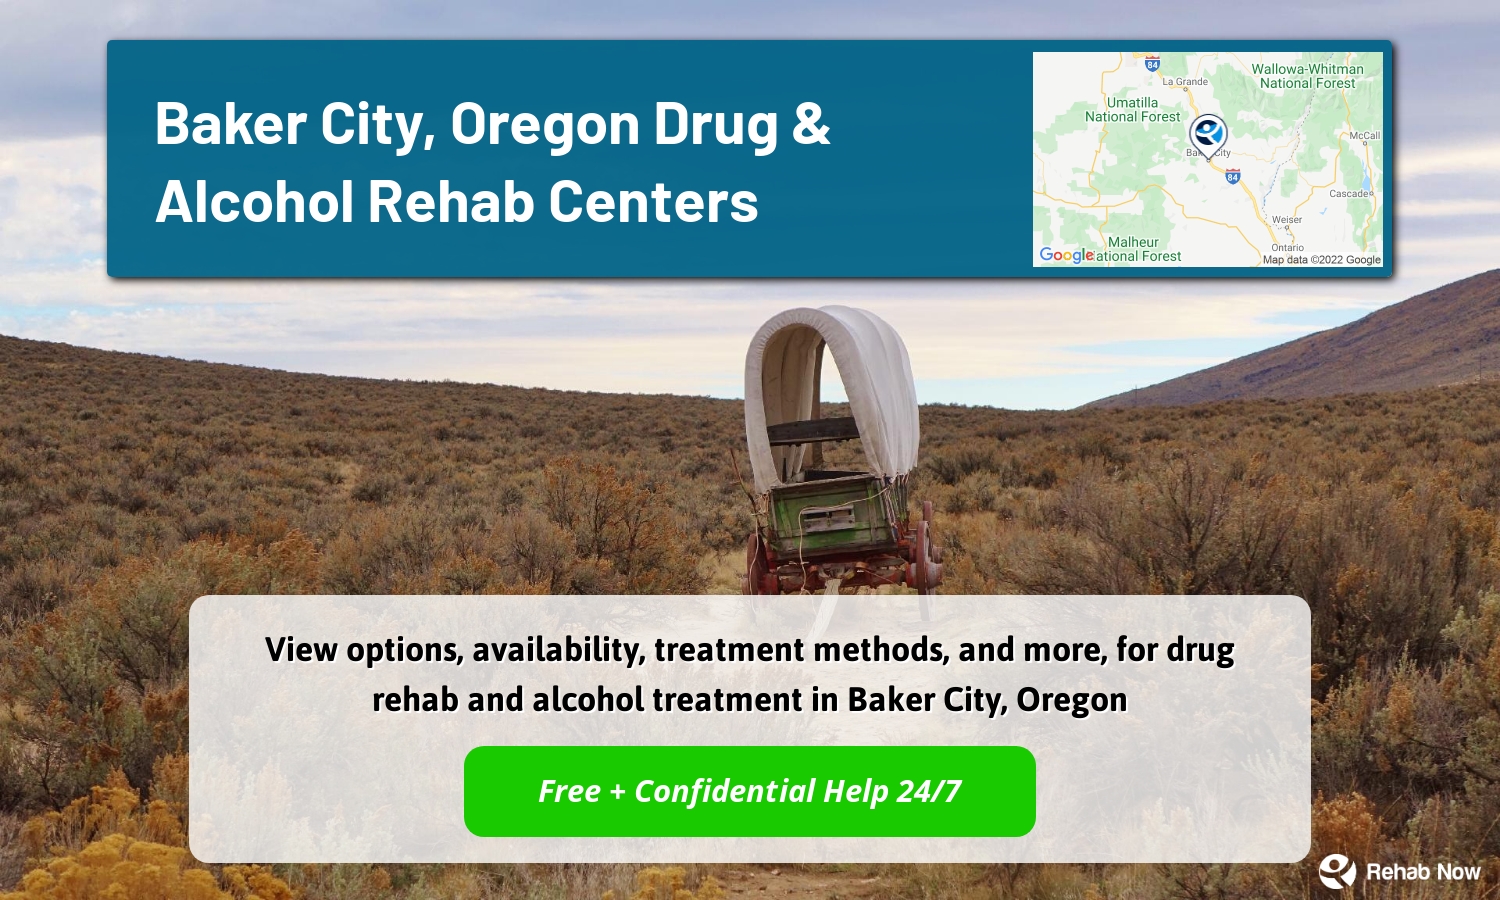 View options, availability, treatment methods, and more, for drug rehab and alcohol treatment in Baker City, Oregon